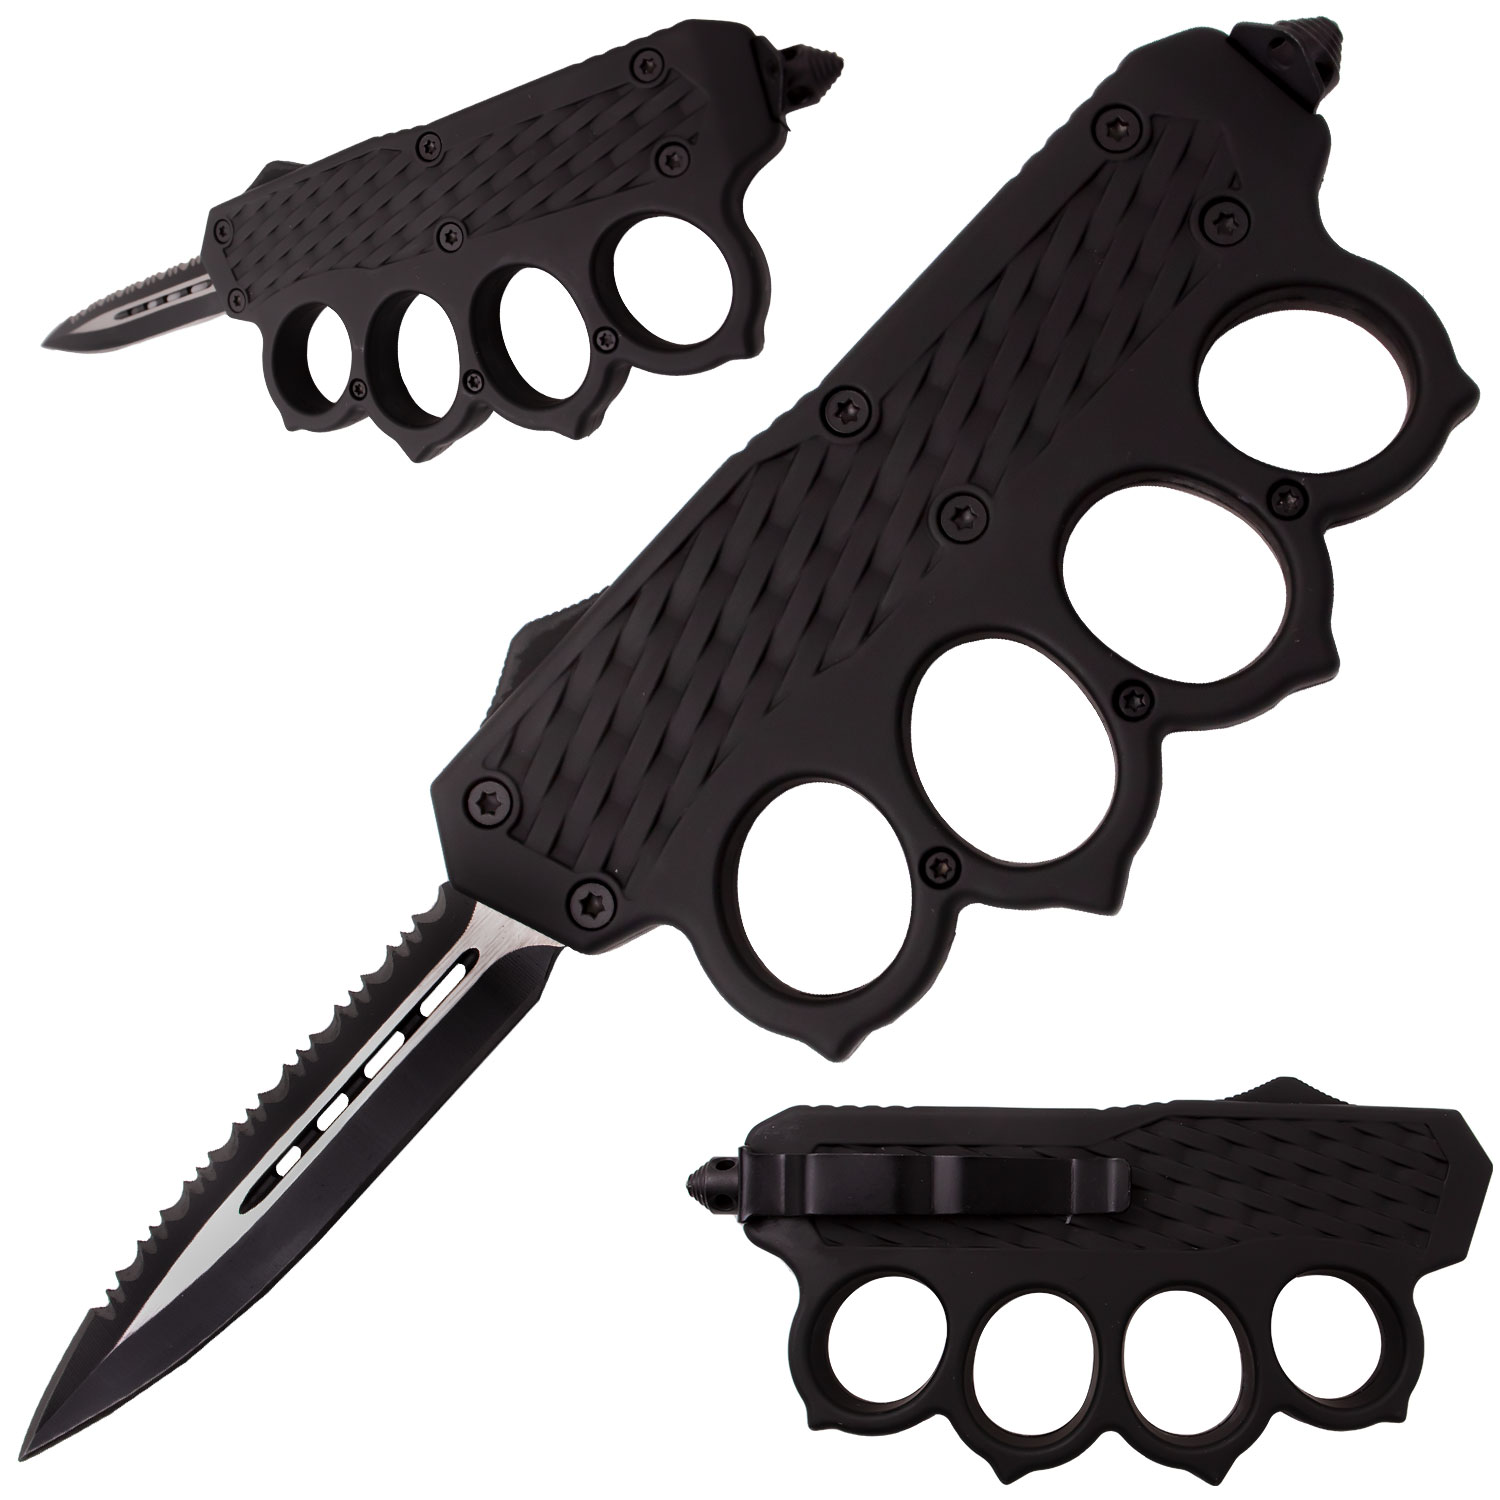 Covert Ops Military Elite Tactical Grip Rubberized OTF Automatic Knuckle Knife Serrated Blade